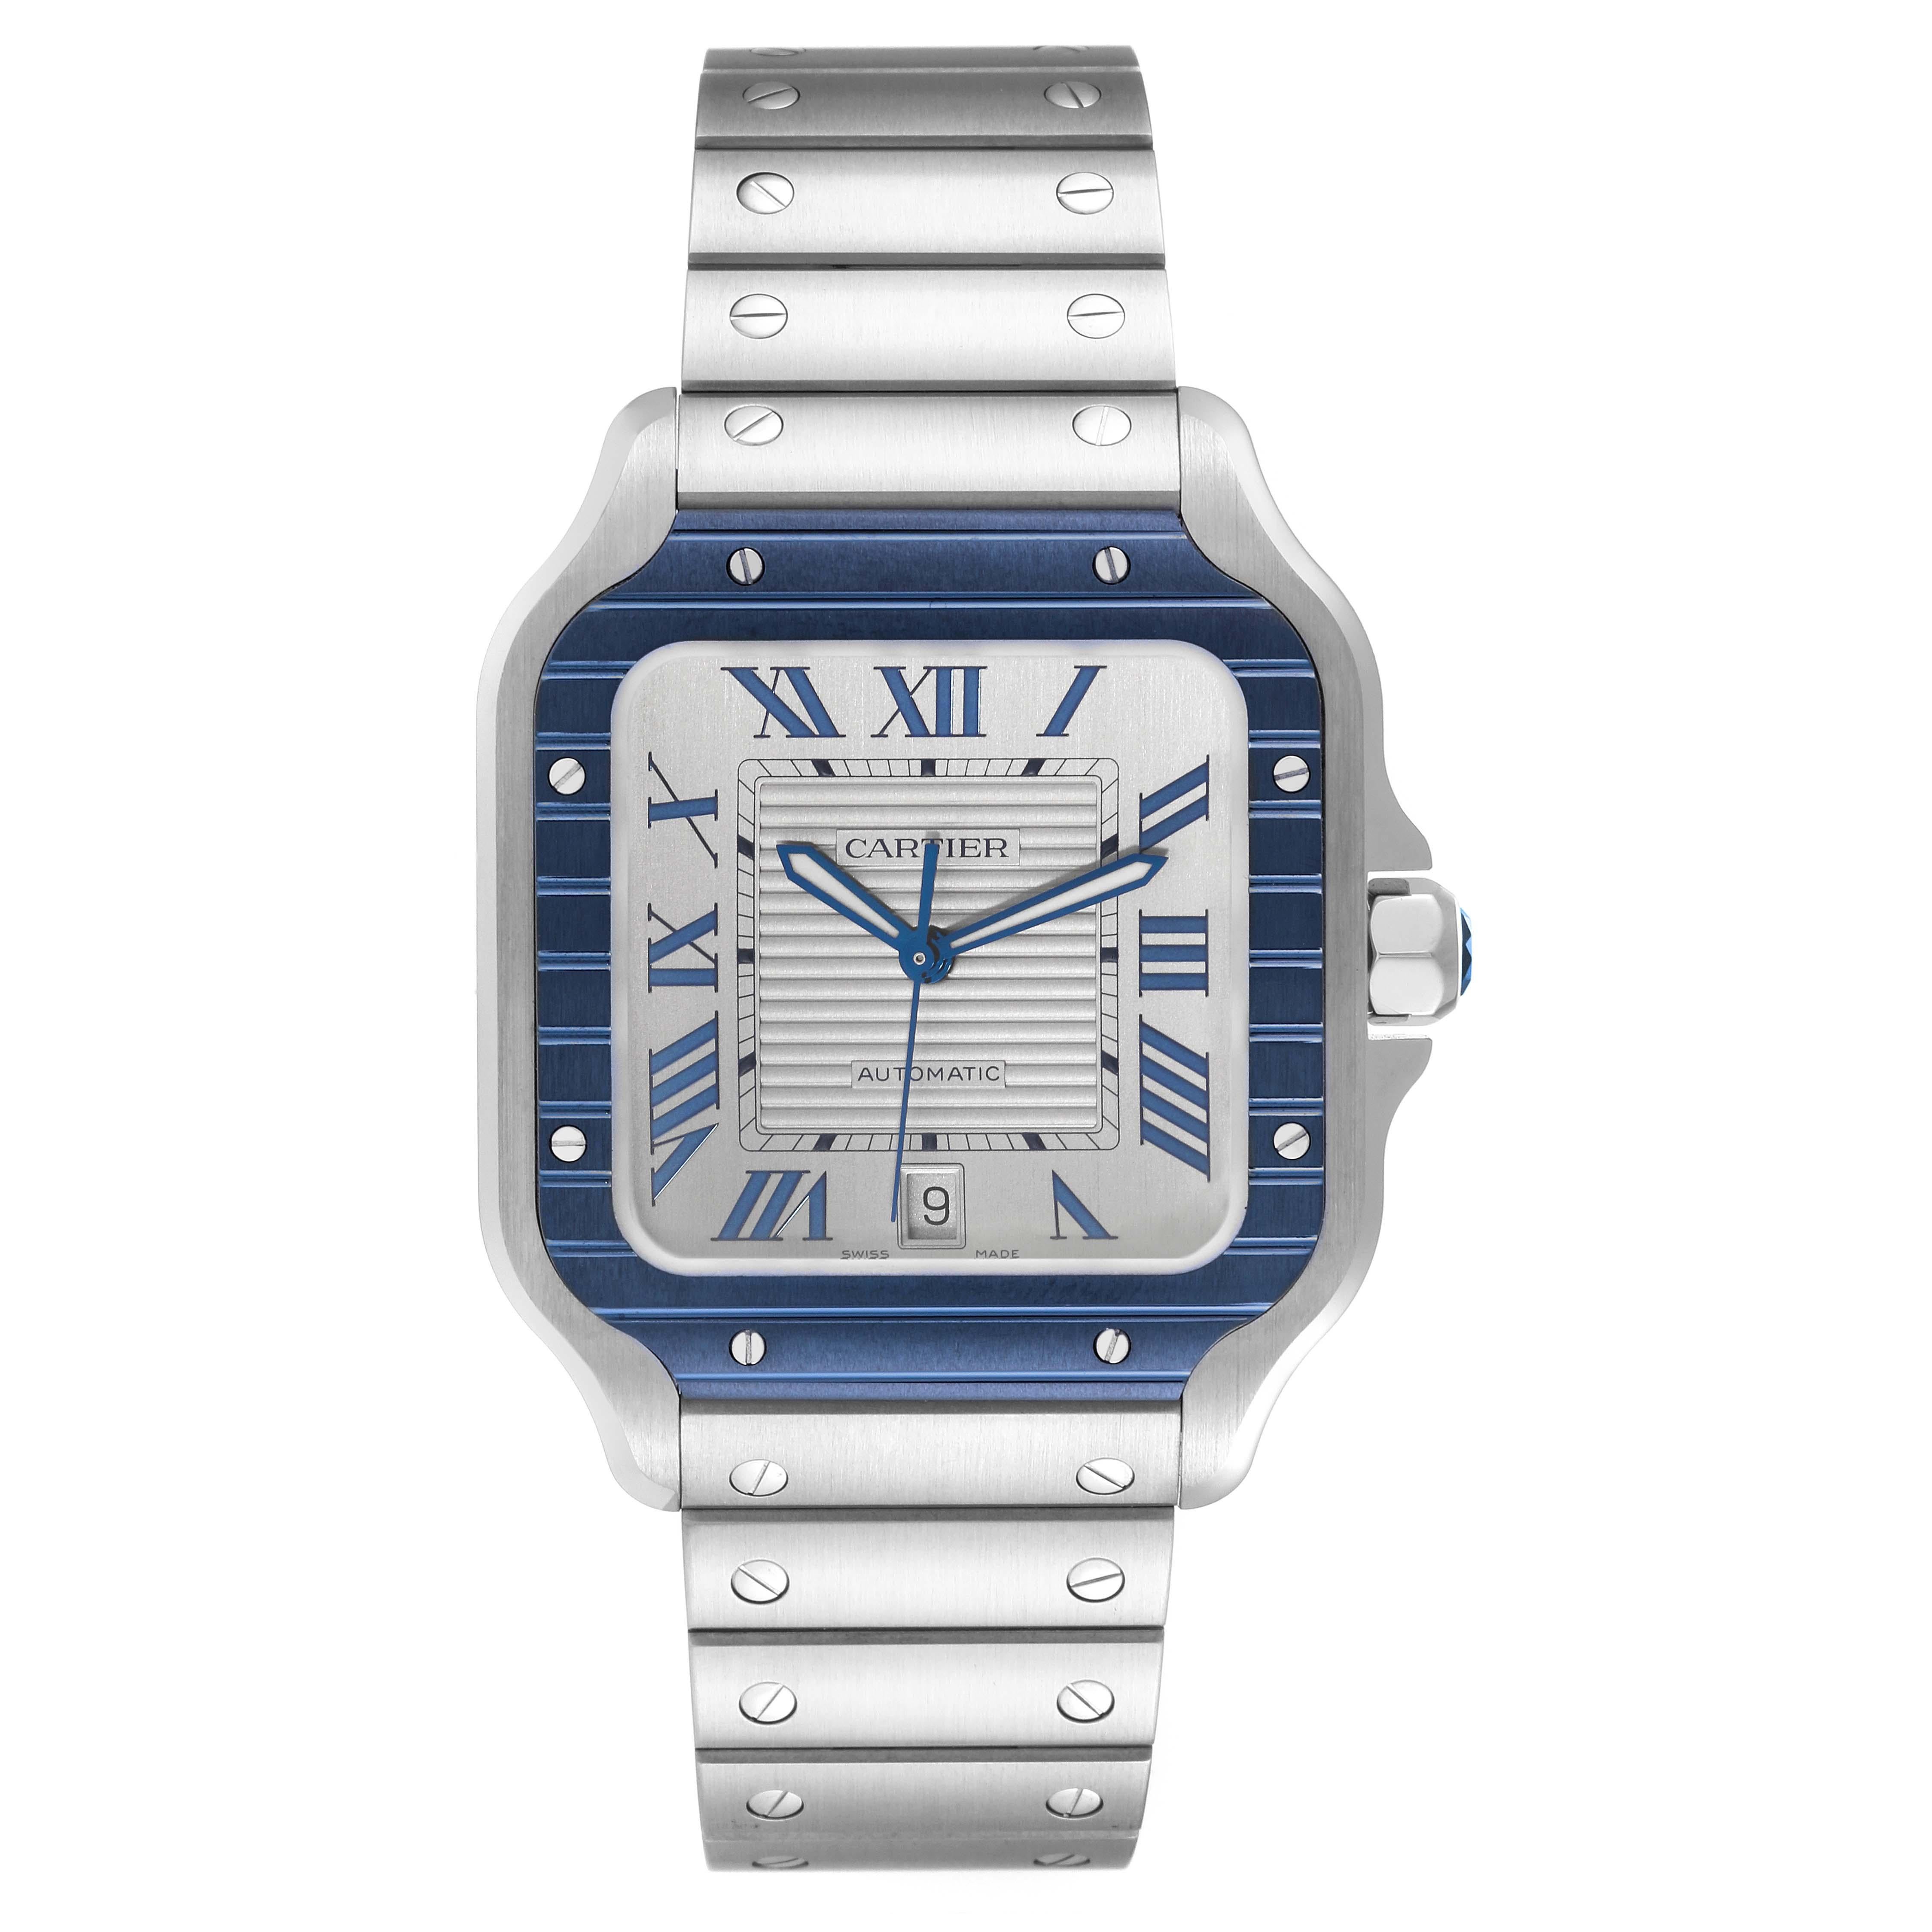 Cartier Santos Large Steel PVD Bezel Silver Dial Mens Watch WSSA0047 Unworn. Automatic self-winding movement. Stainless steel case 39.8 x 47.5 mm. Octagonal crown set with a faceted blue spinel. Blue PVD bezel punctuated with 8 signature screws.